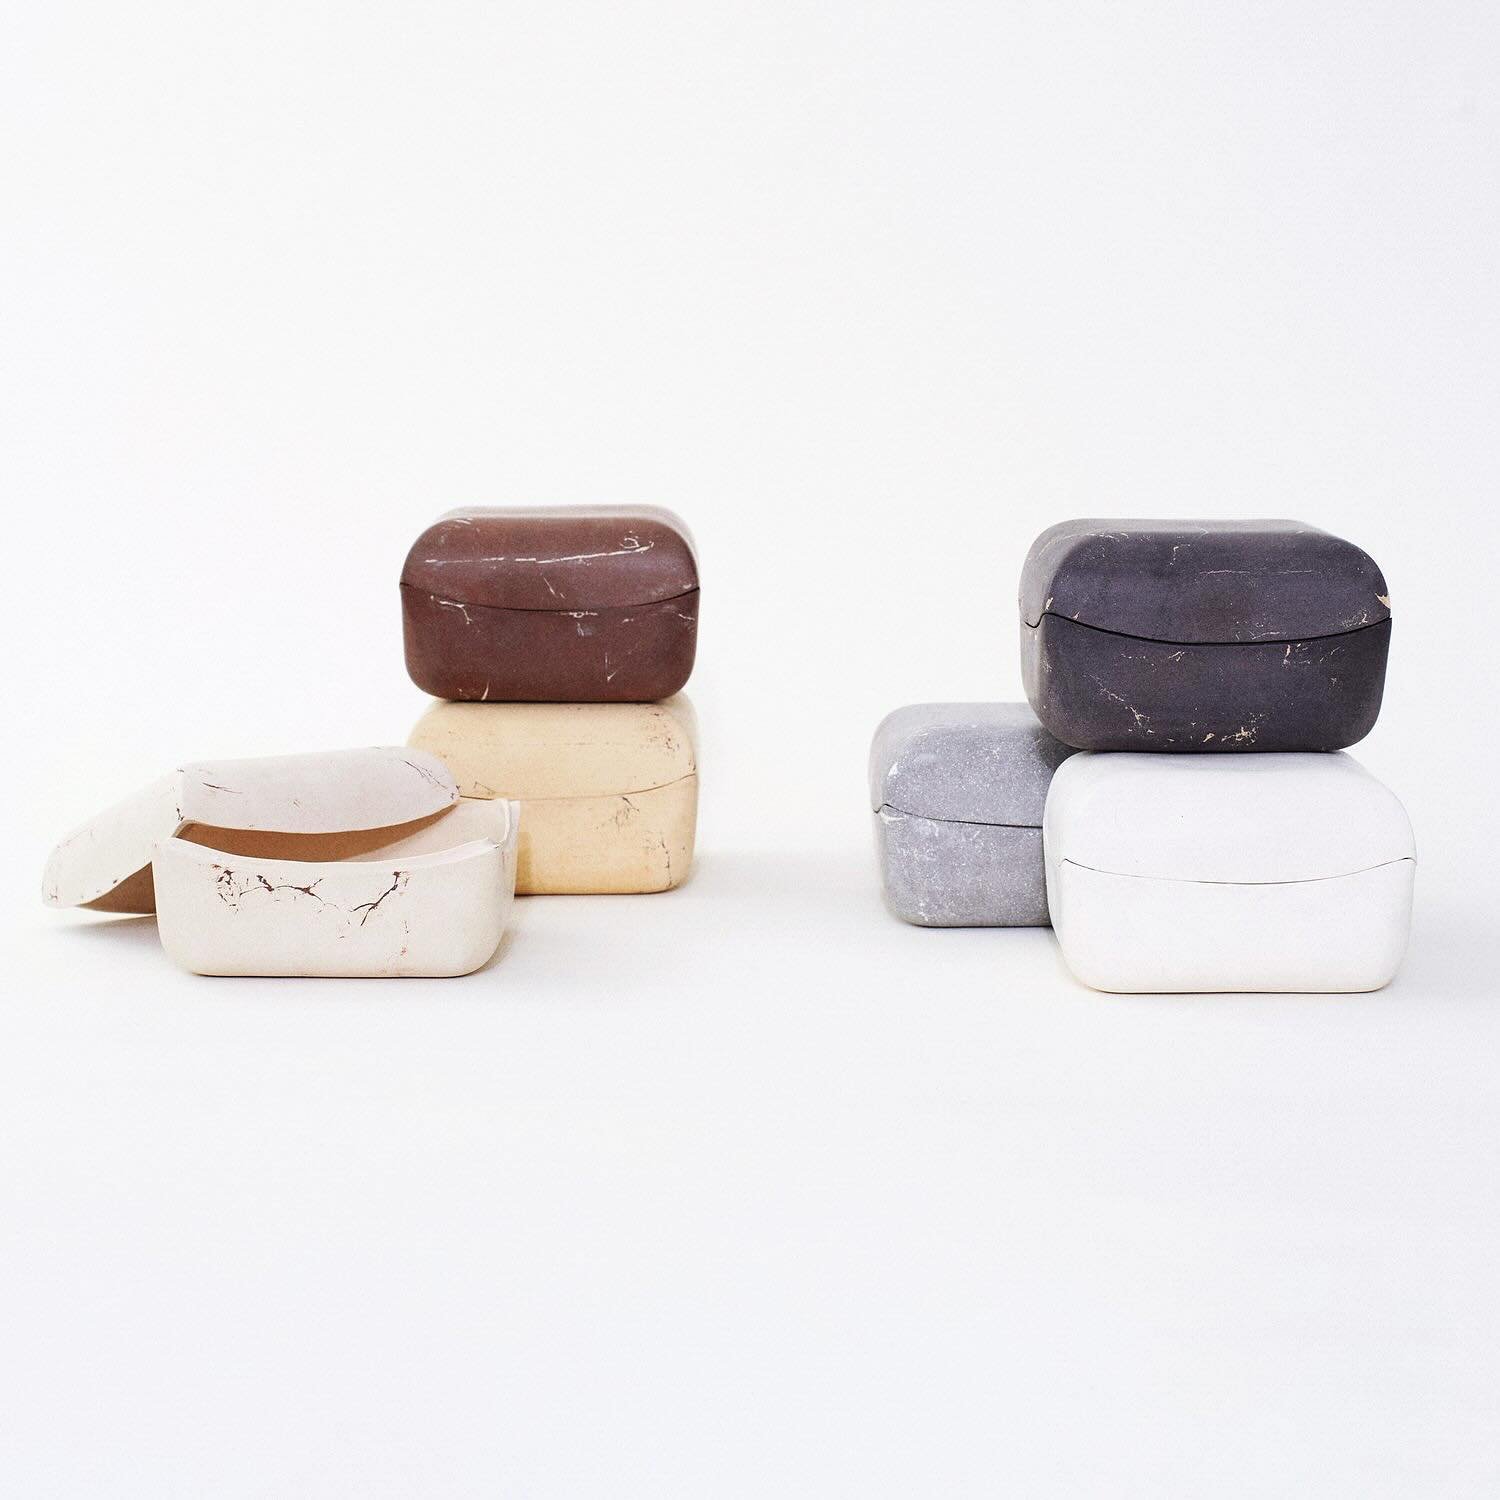 NEW &lsquo;Ceramic Marble Boxes&rsquo; by Erica Tung, handmade &amp; sanded for multiple hours to resemble the look and texture of marble 
Shop now - 12thirteen-store.com
.
.
.
#1213 #12thirteenstore #12thirteen #artisan #artisanmade #homeware #homew